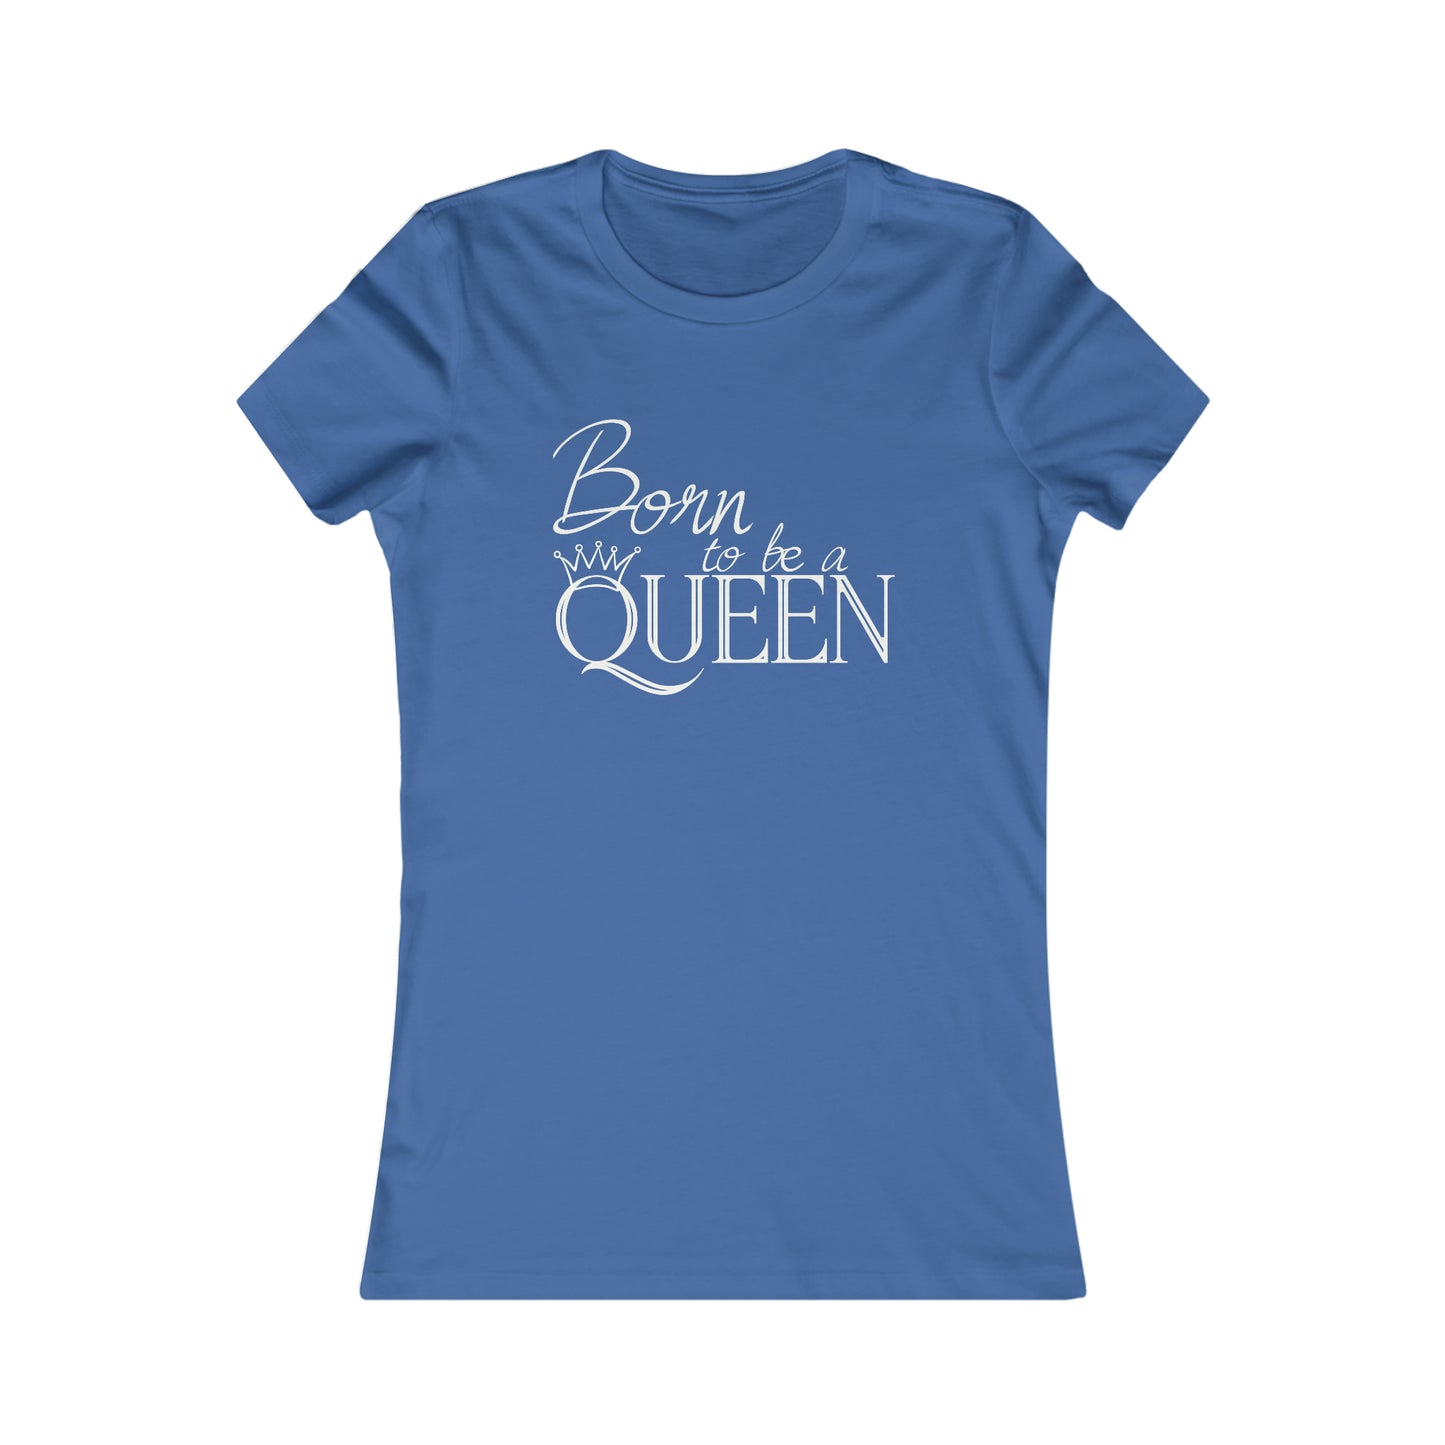 Born to be a Queen - Women's Favorite Tee